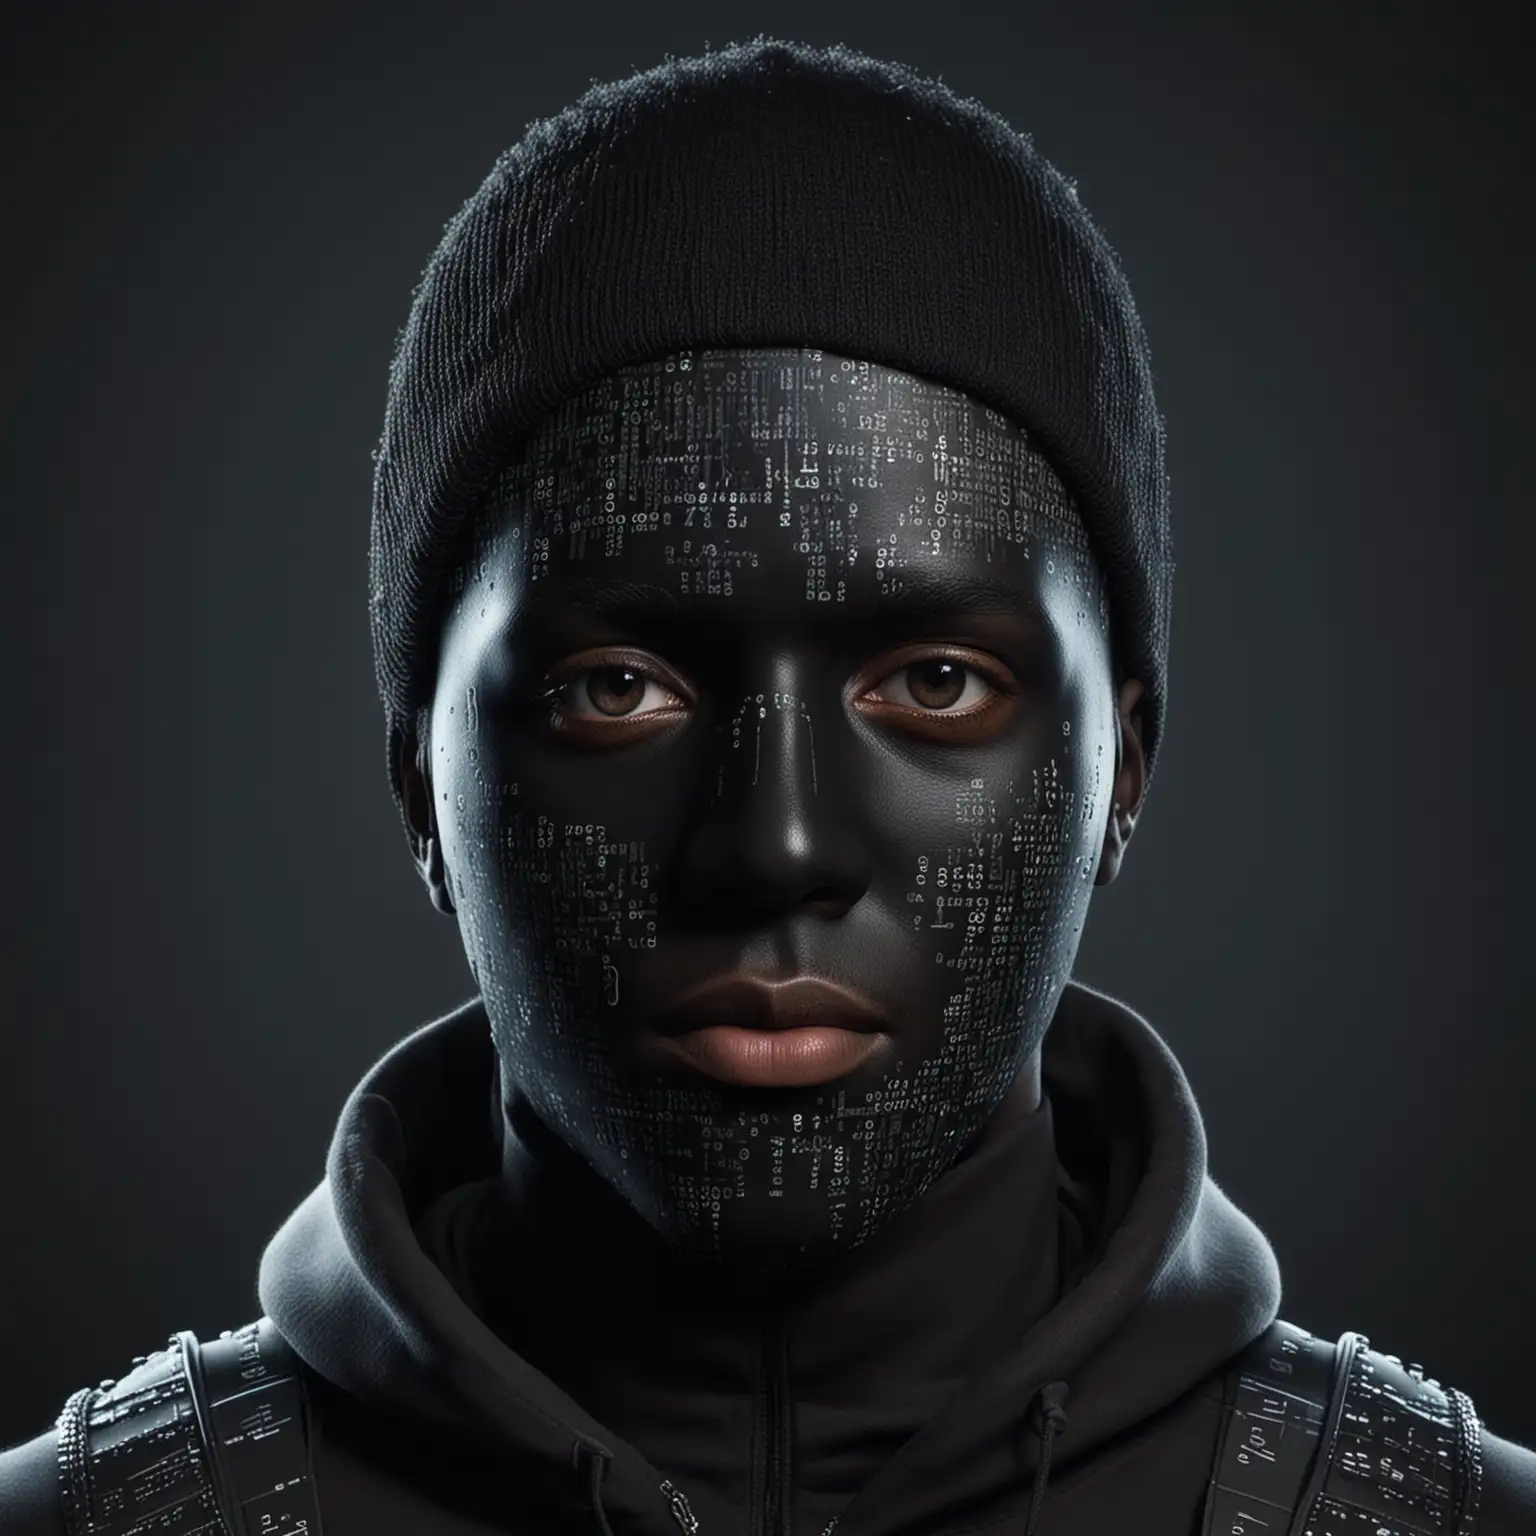 Futuristic Ethnically Black Male Hacker with Digit Mask